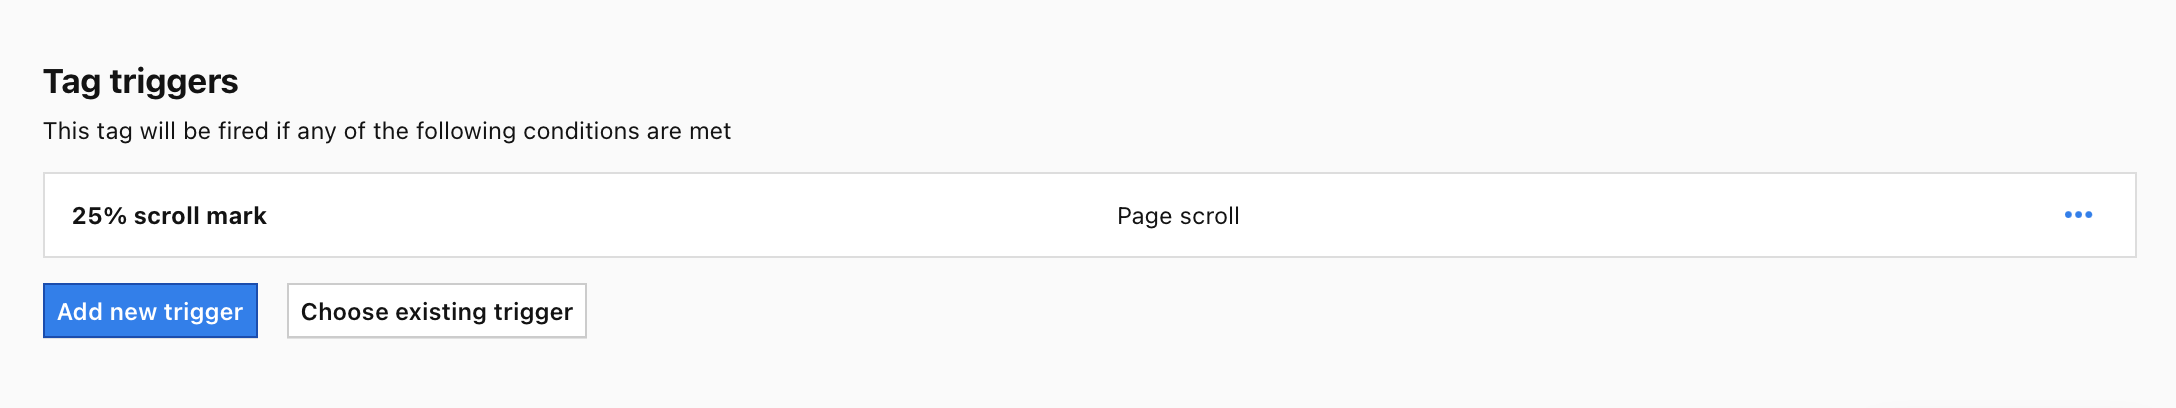 Page scroll trigger in Piwik PRO